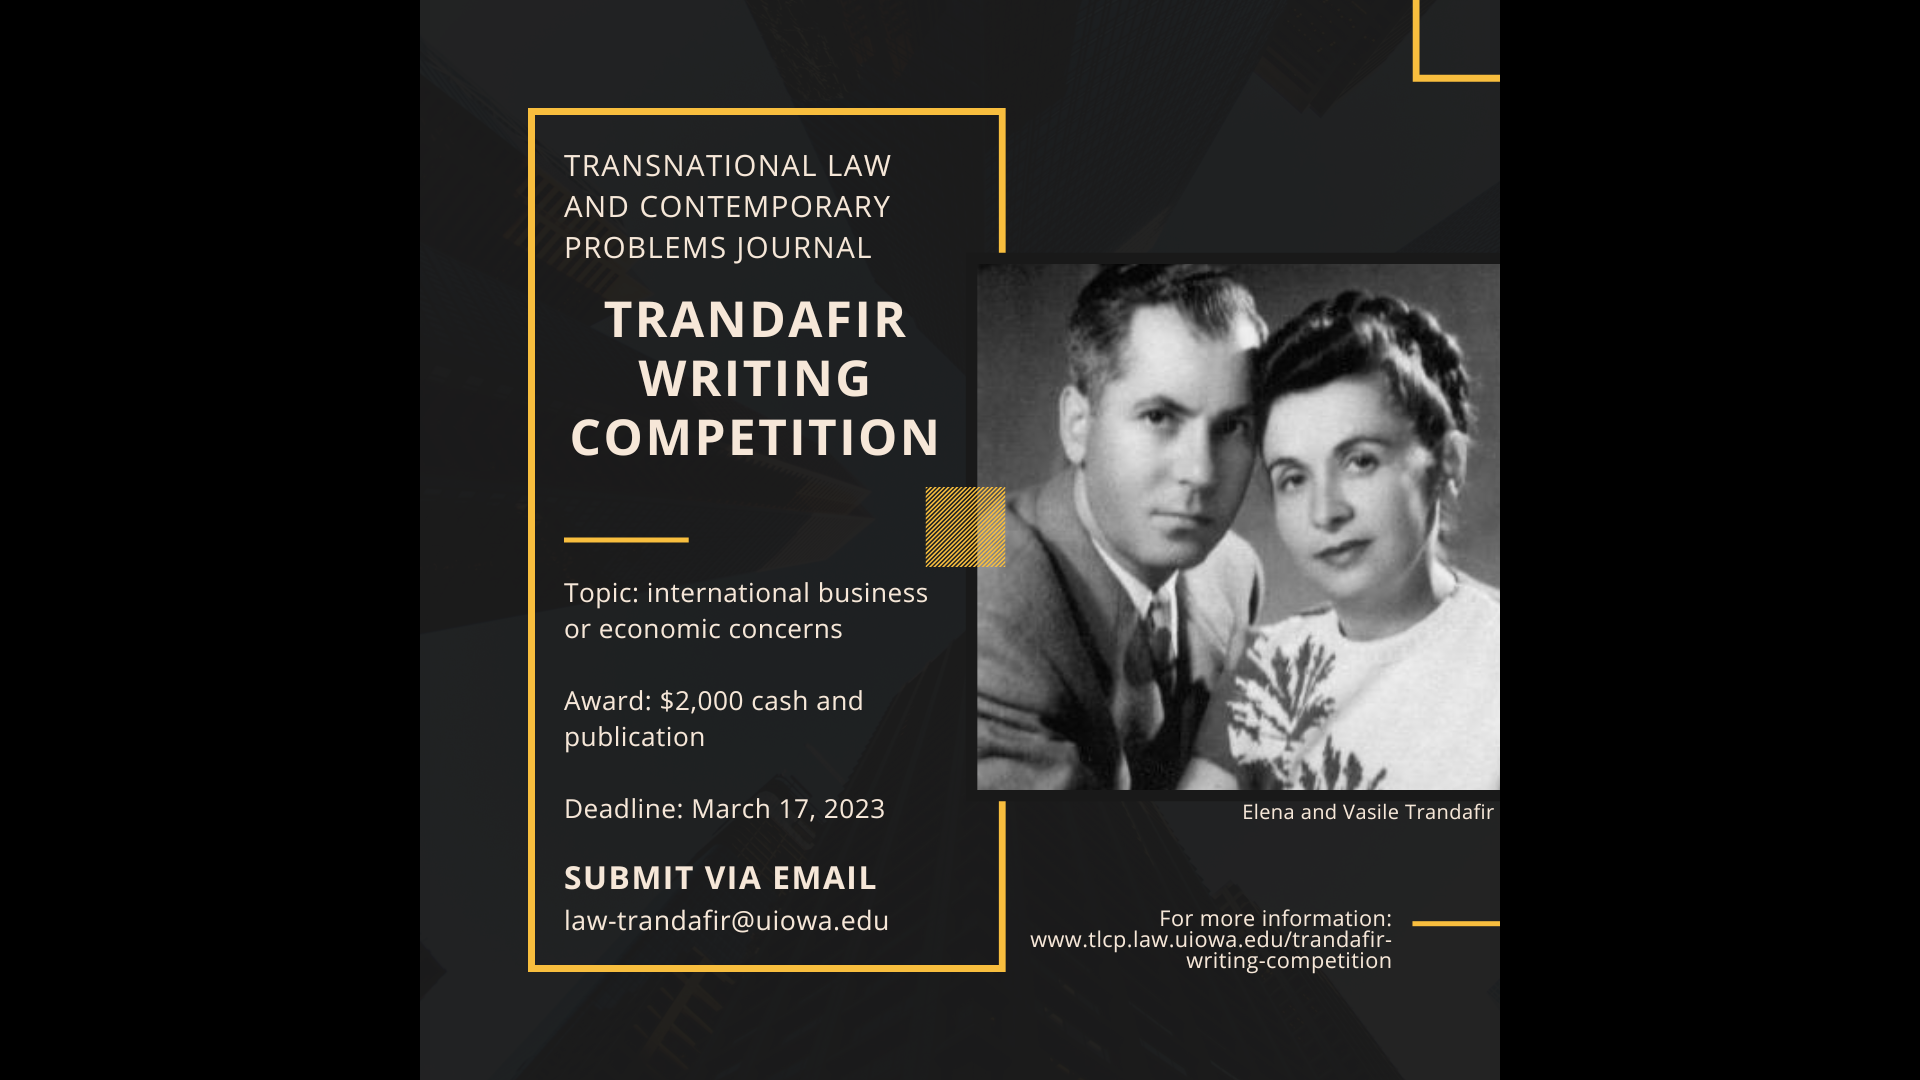 Transnational Law and Contemporary Problems Journal - Trandafir Writing Competition. Topic: international business or economic concerns. Award: $2000 cash and publication. Deadline: March 17, 2023. Submit via email: law-trandafir@uiowa.edu. For more information: www.tlcp.law.uiowa.edu/trandafir-writing-competition